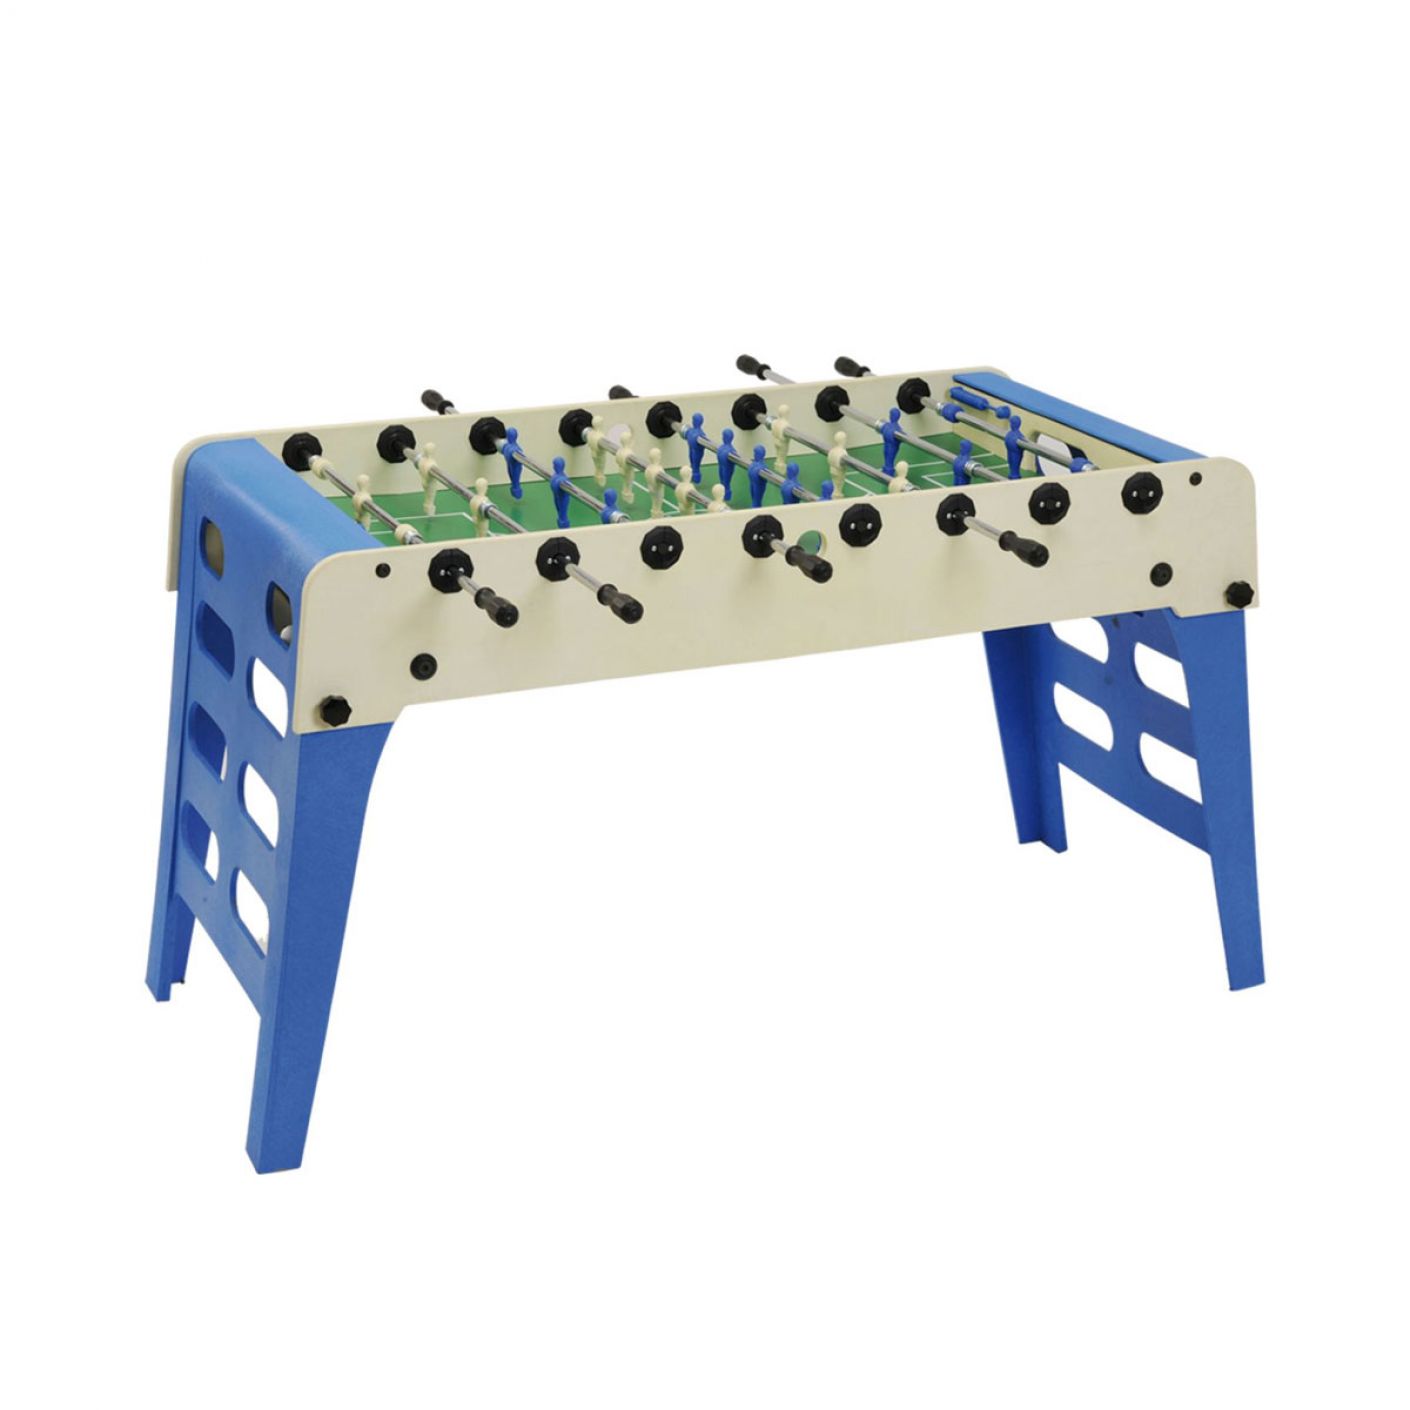 Garlando Football Table Open Air with retracting rods, folding legs